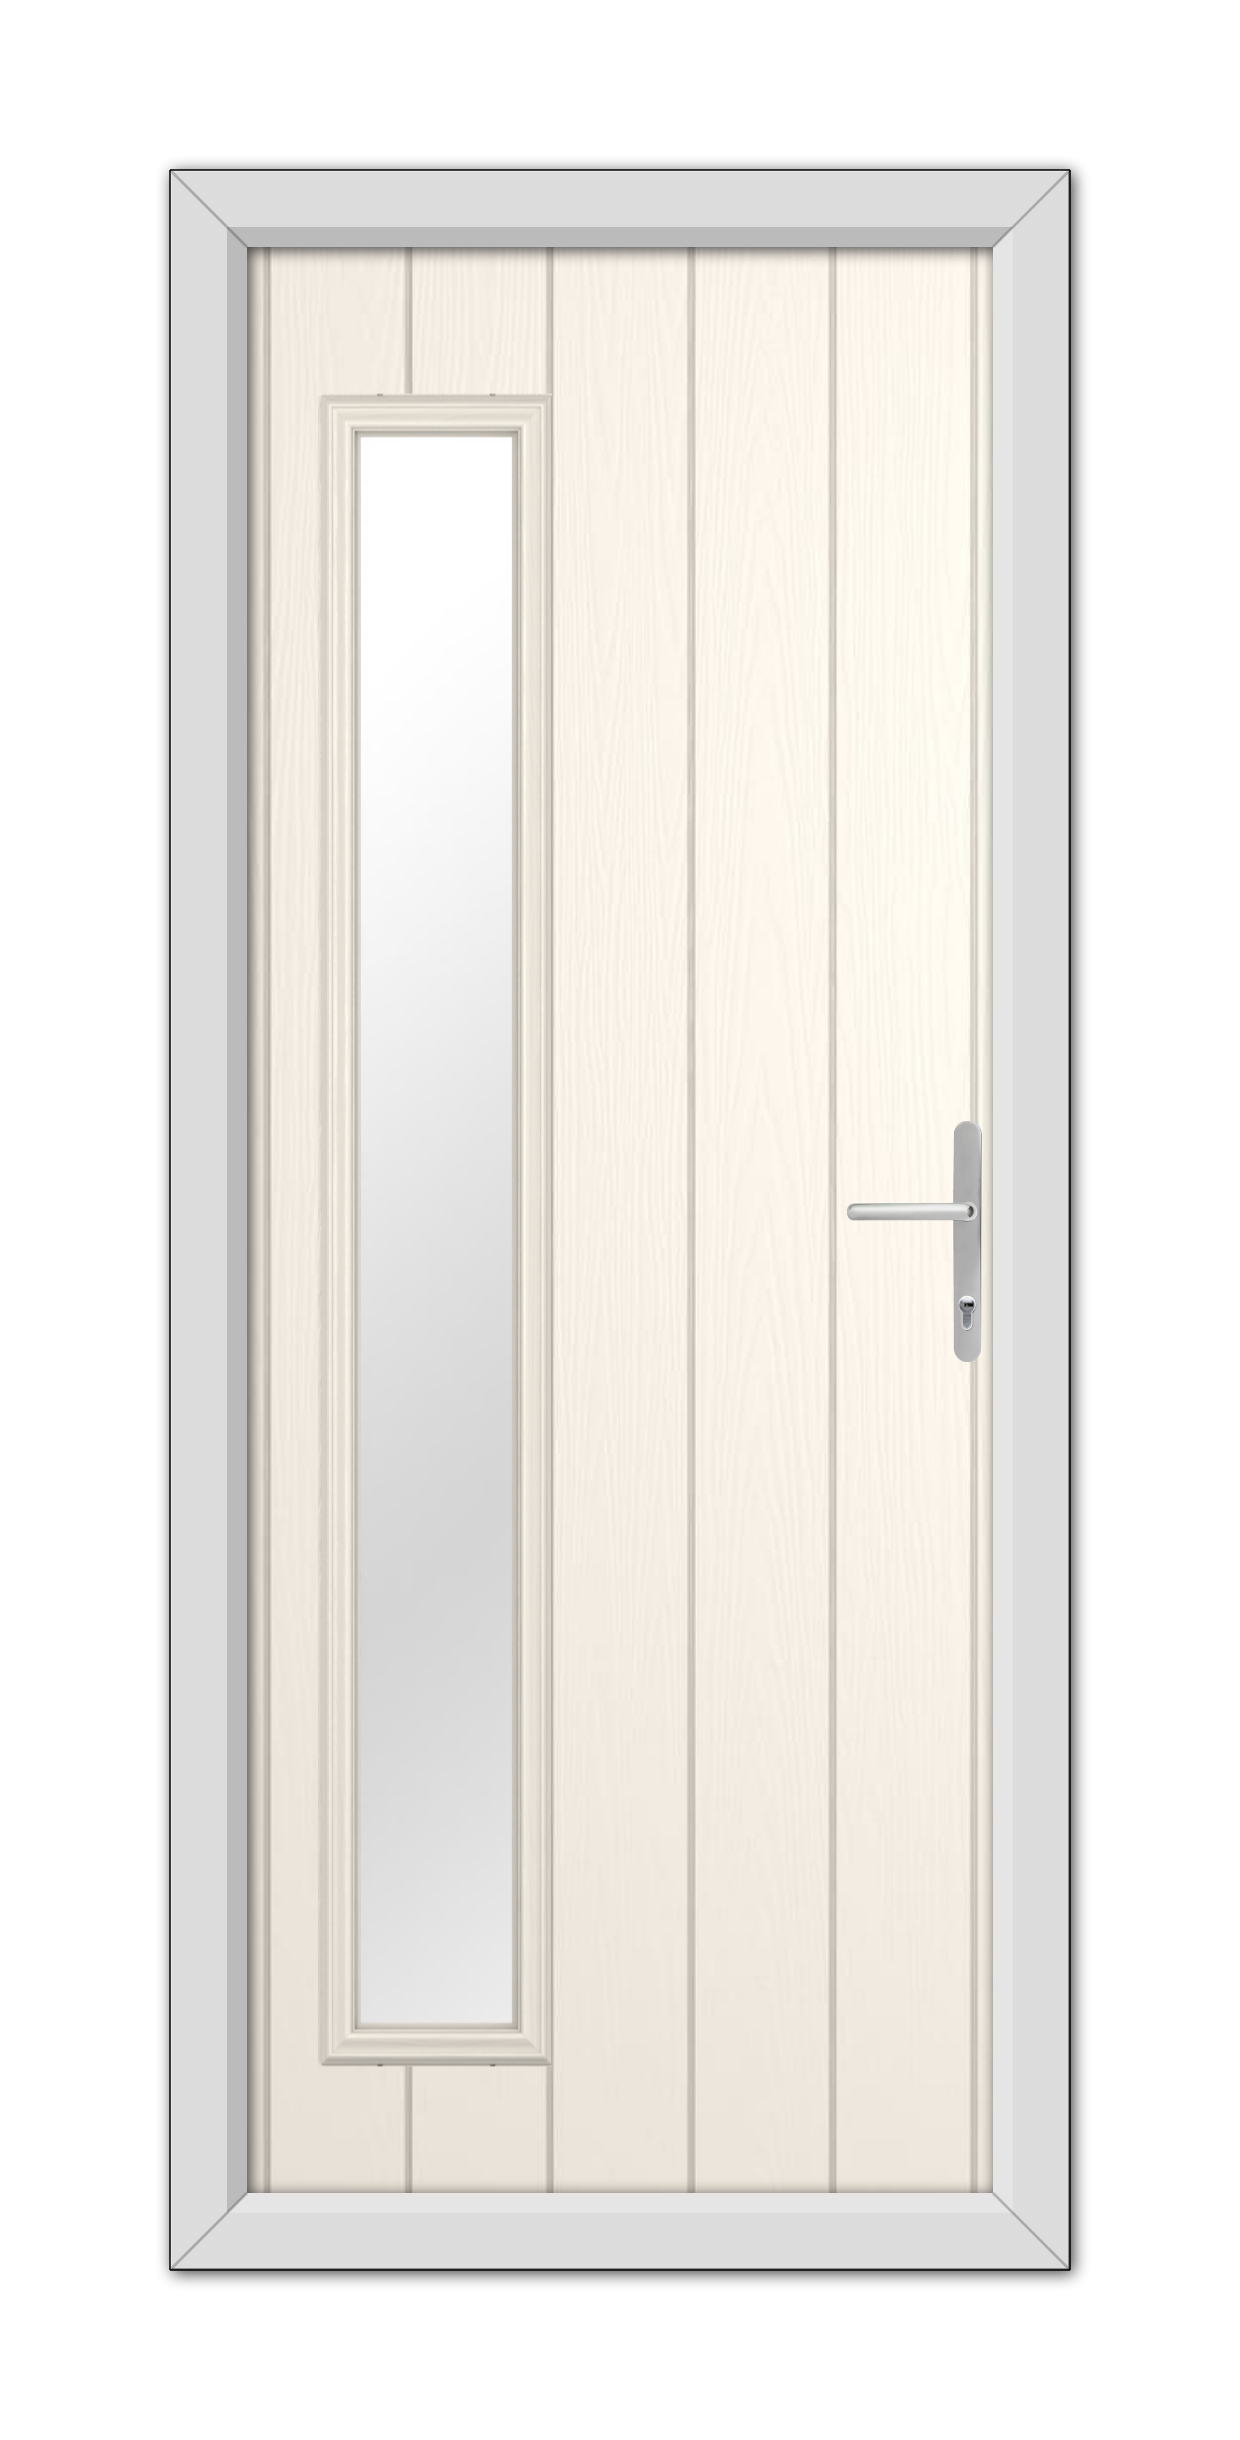 A White Foil Sutherland Composite Door 48mm Timber Core with a vertical, rectangular glass pane on the left side, equipped with a modern handle, set within a gray frame.